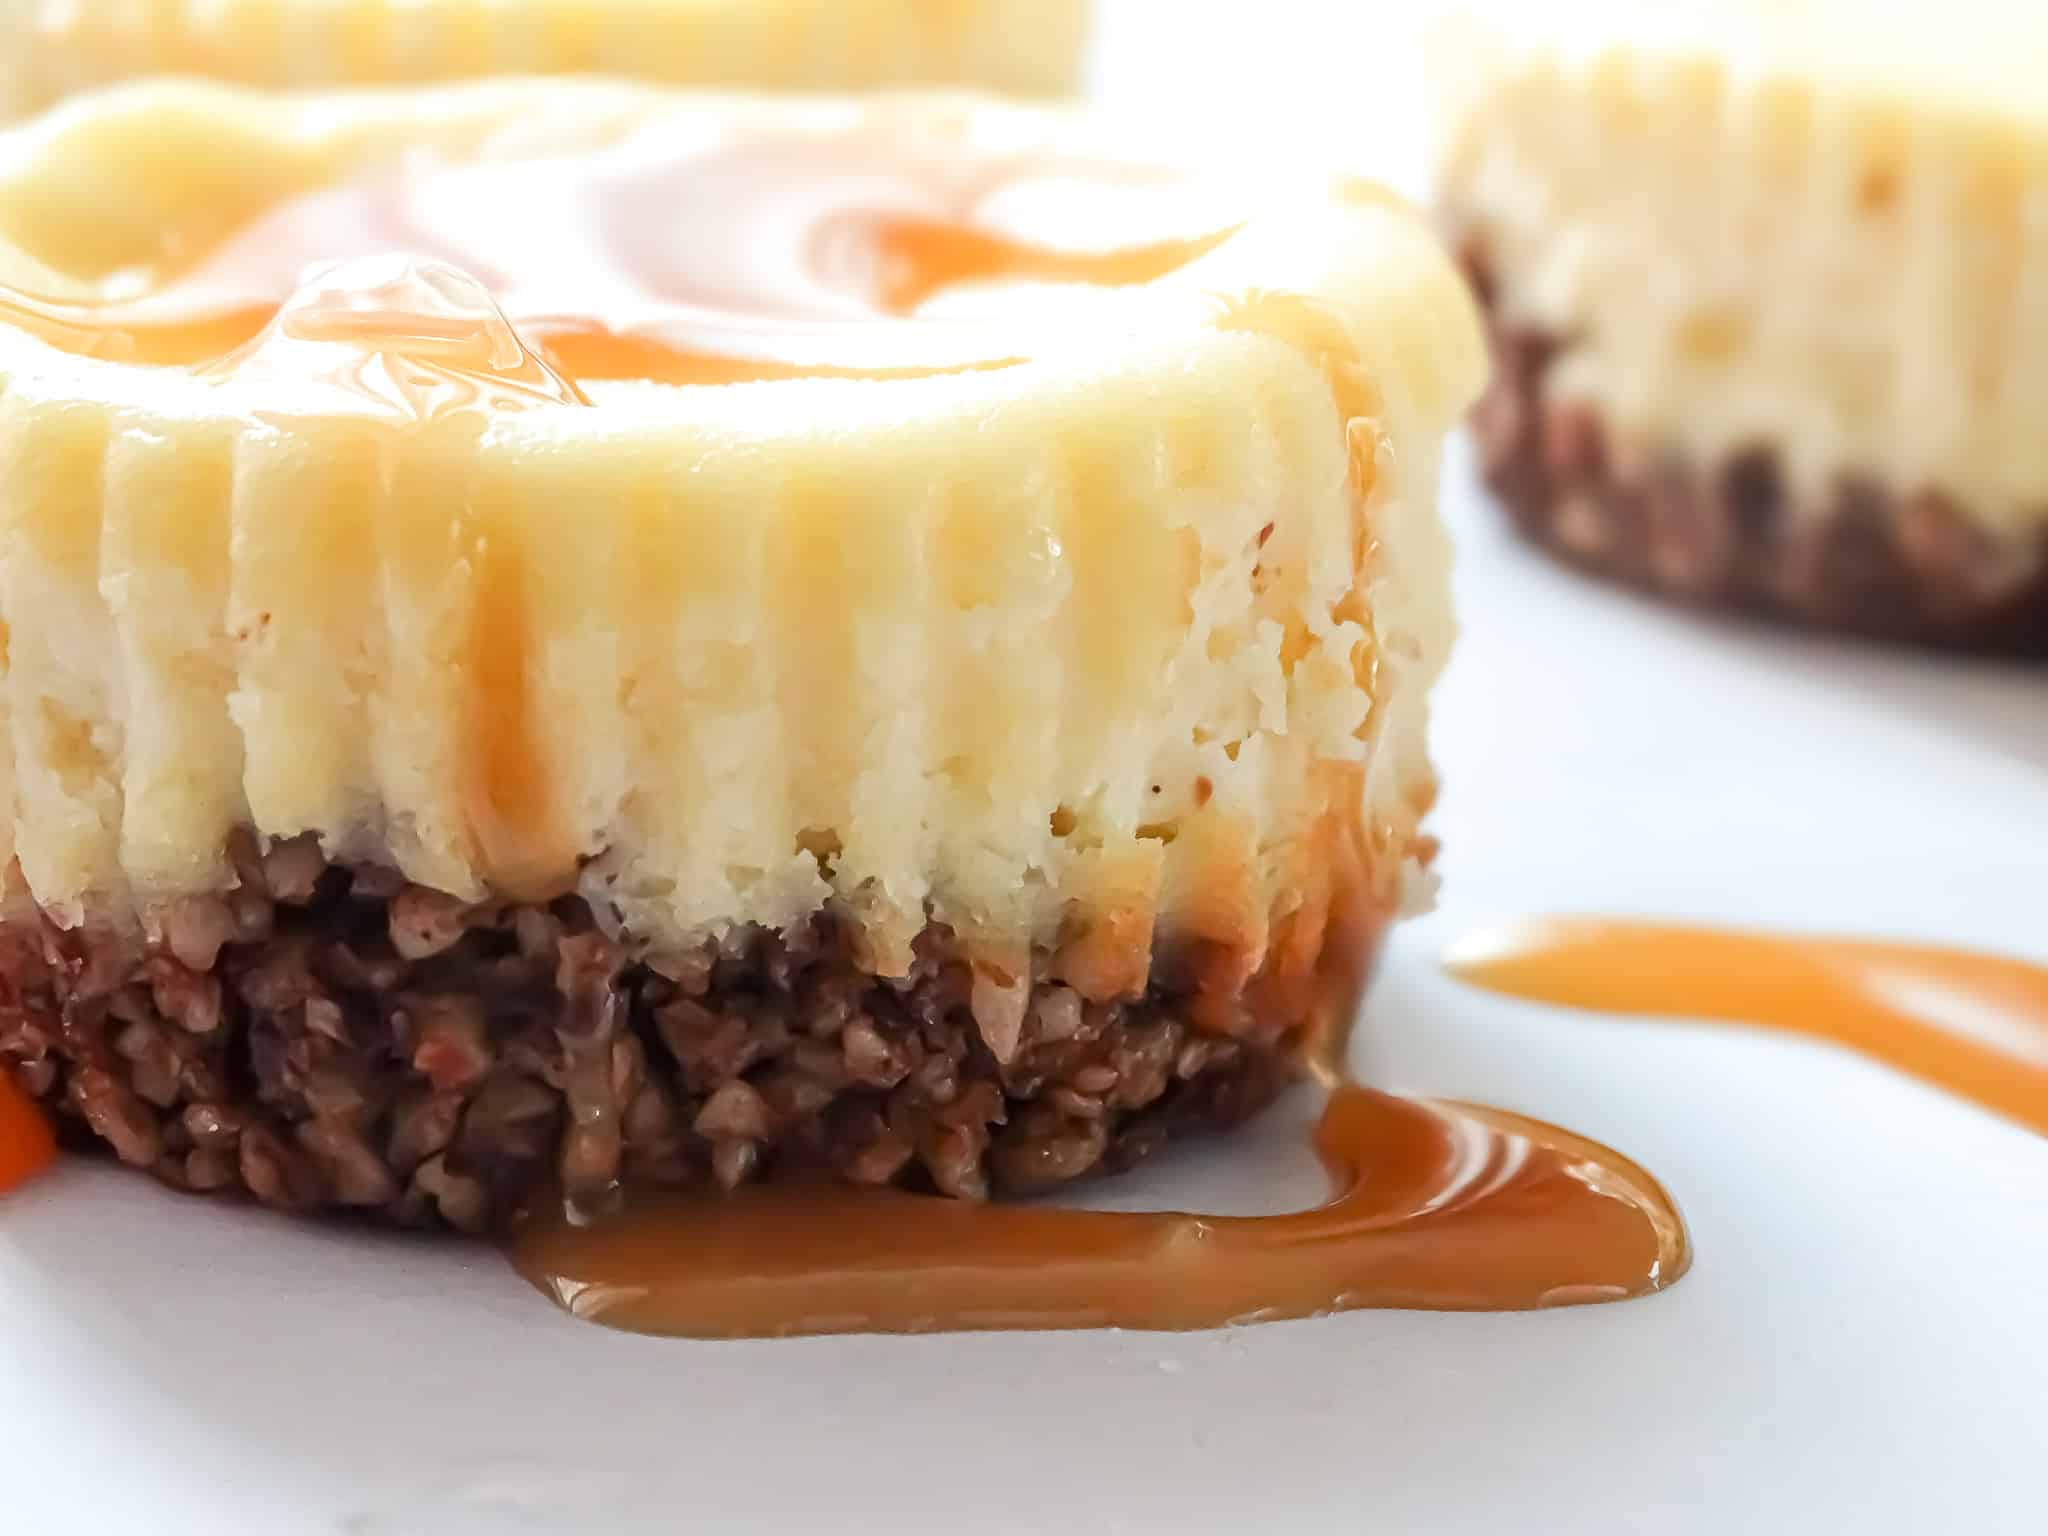 Mini Cheesecakes with Salted Caramel